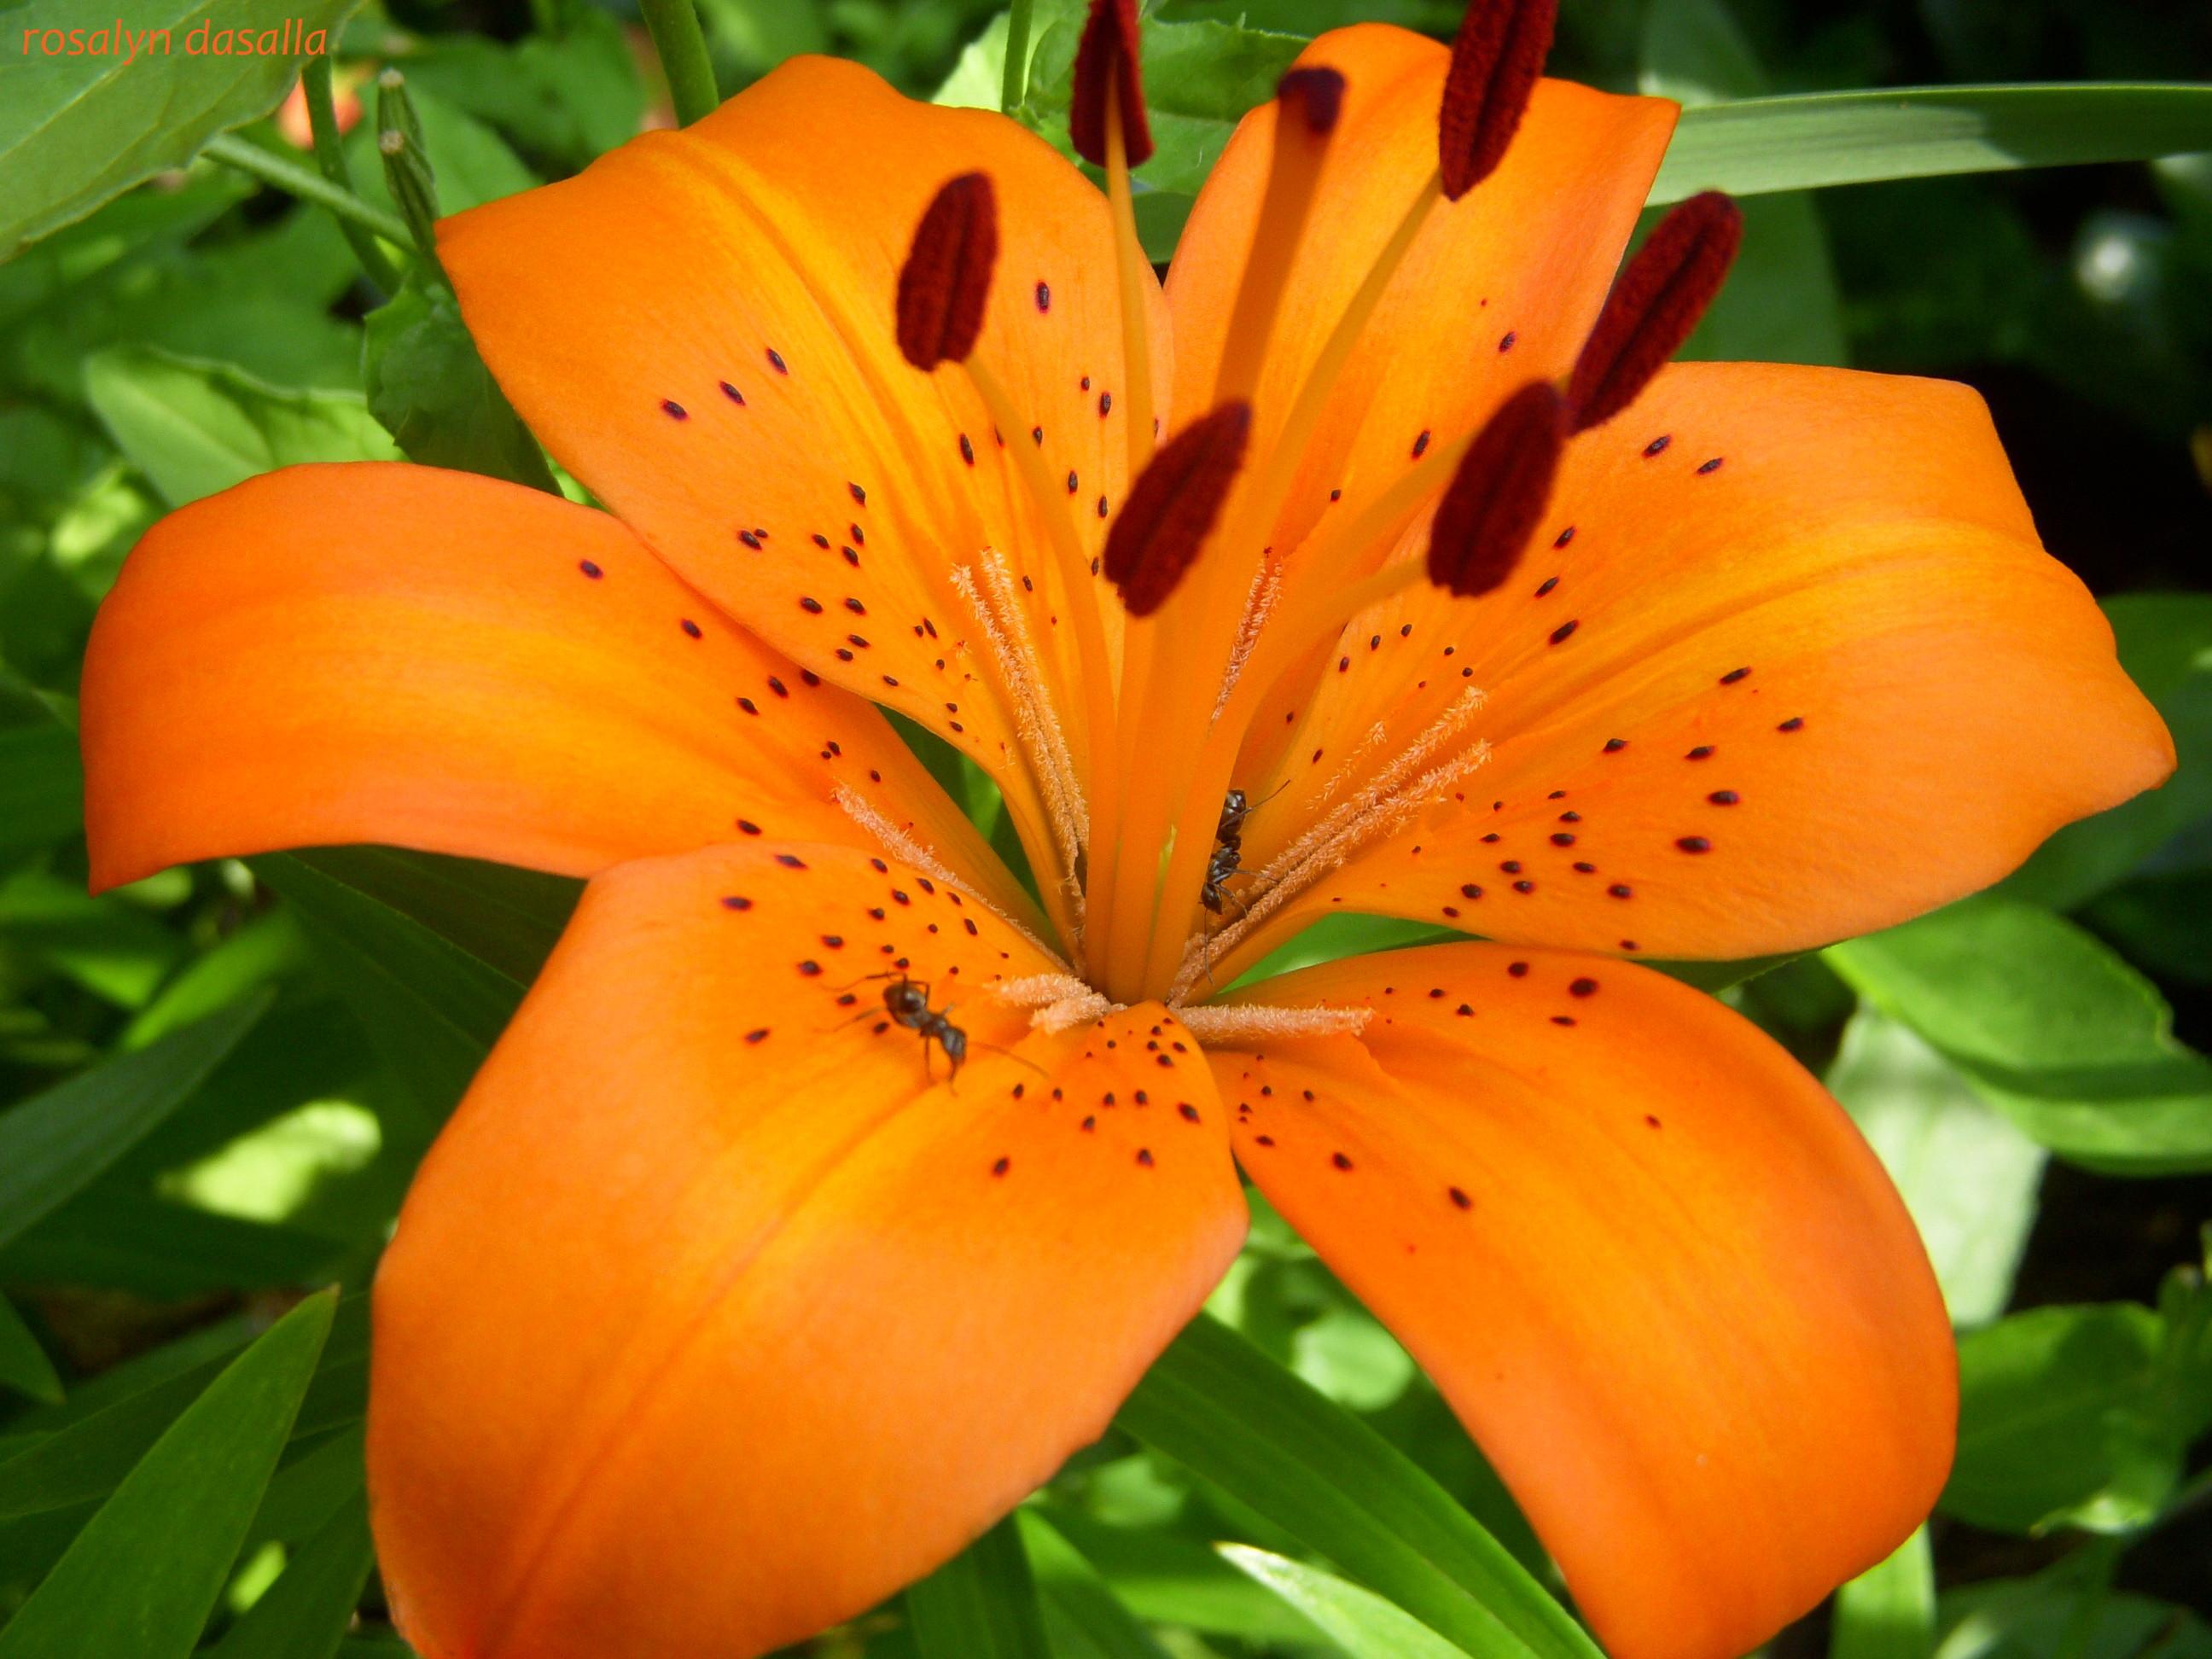 Tiger Lily.....my favorite...too bad lilies smell like funeral homes ...